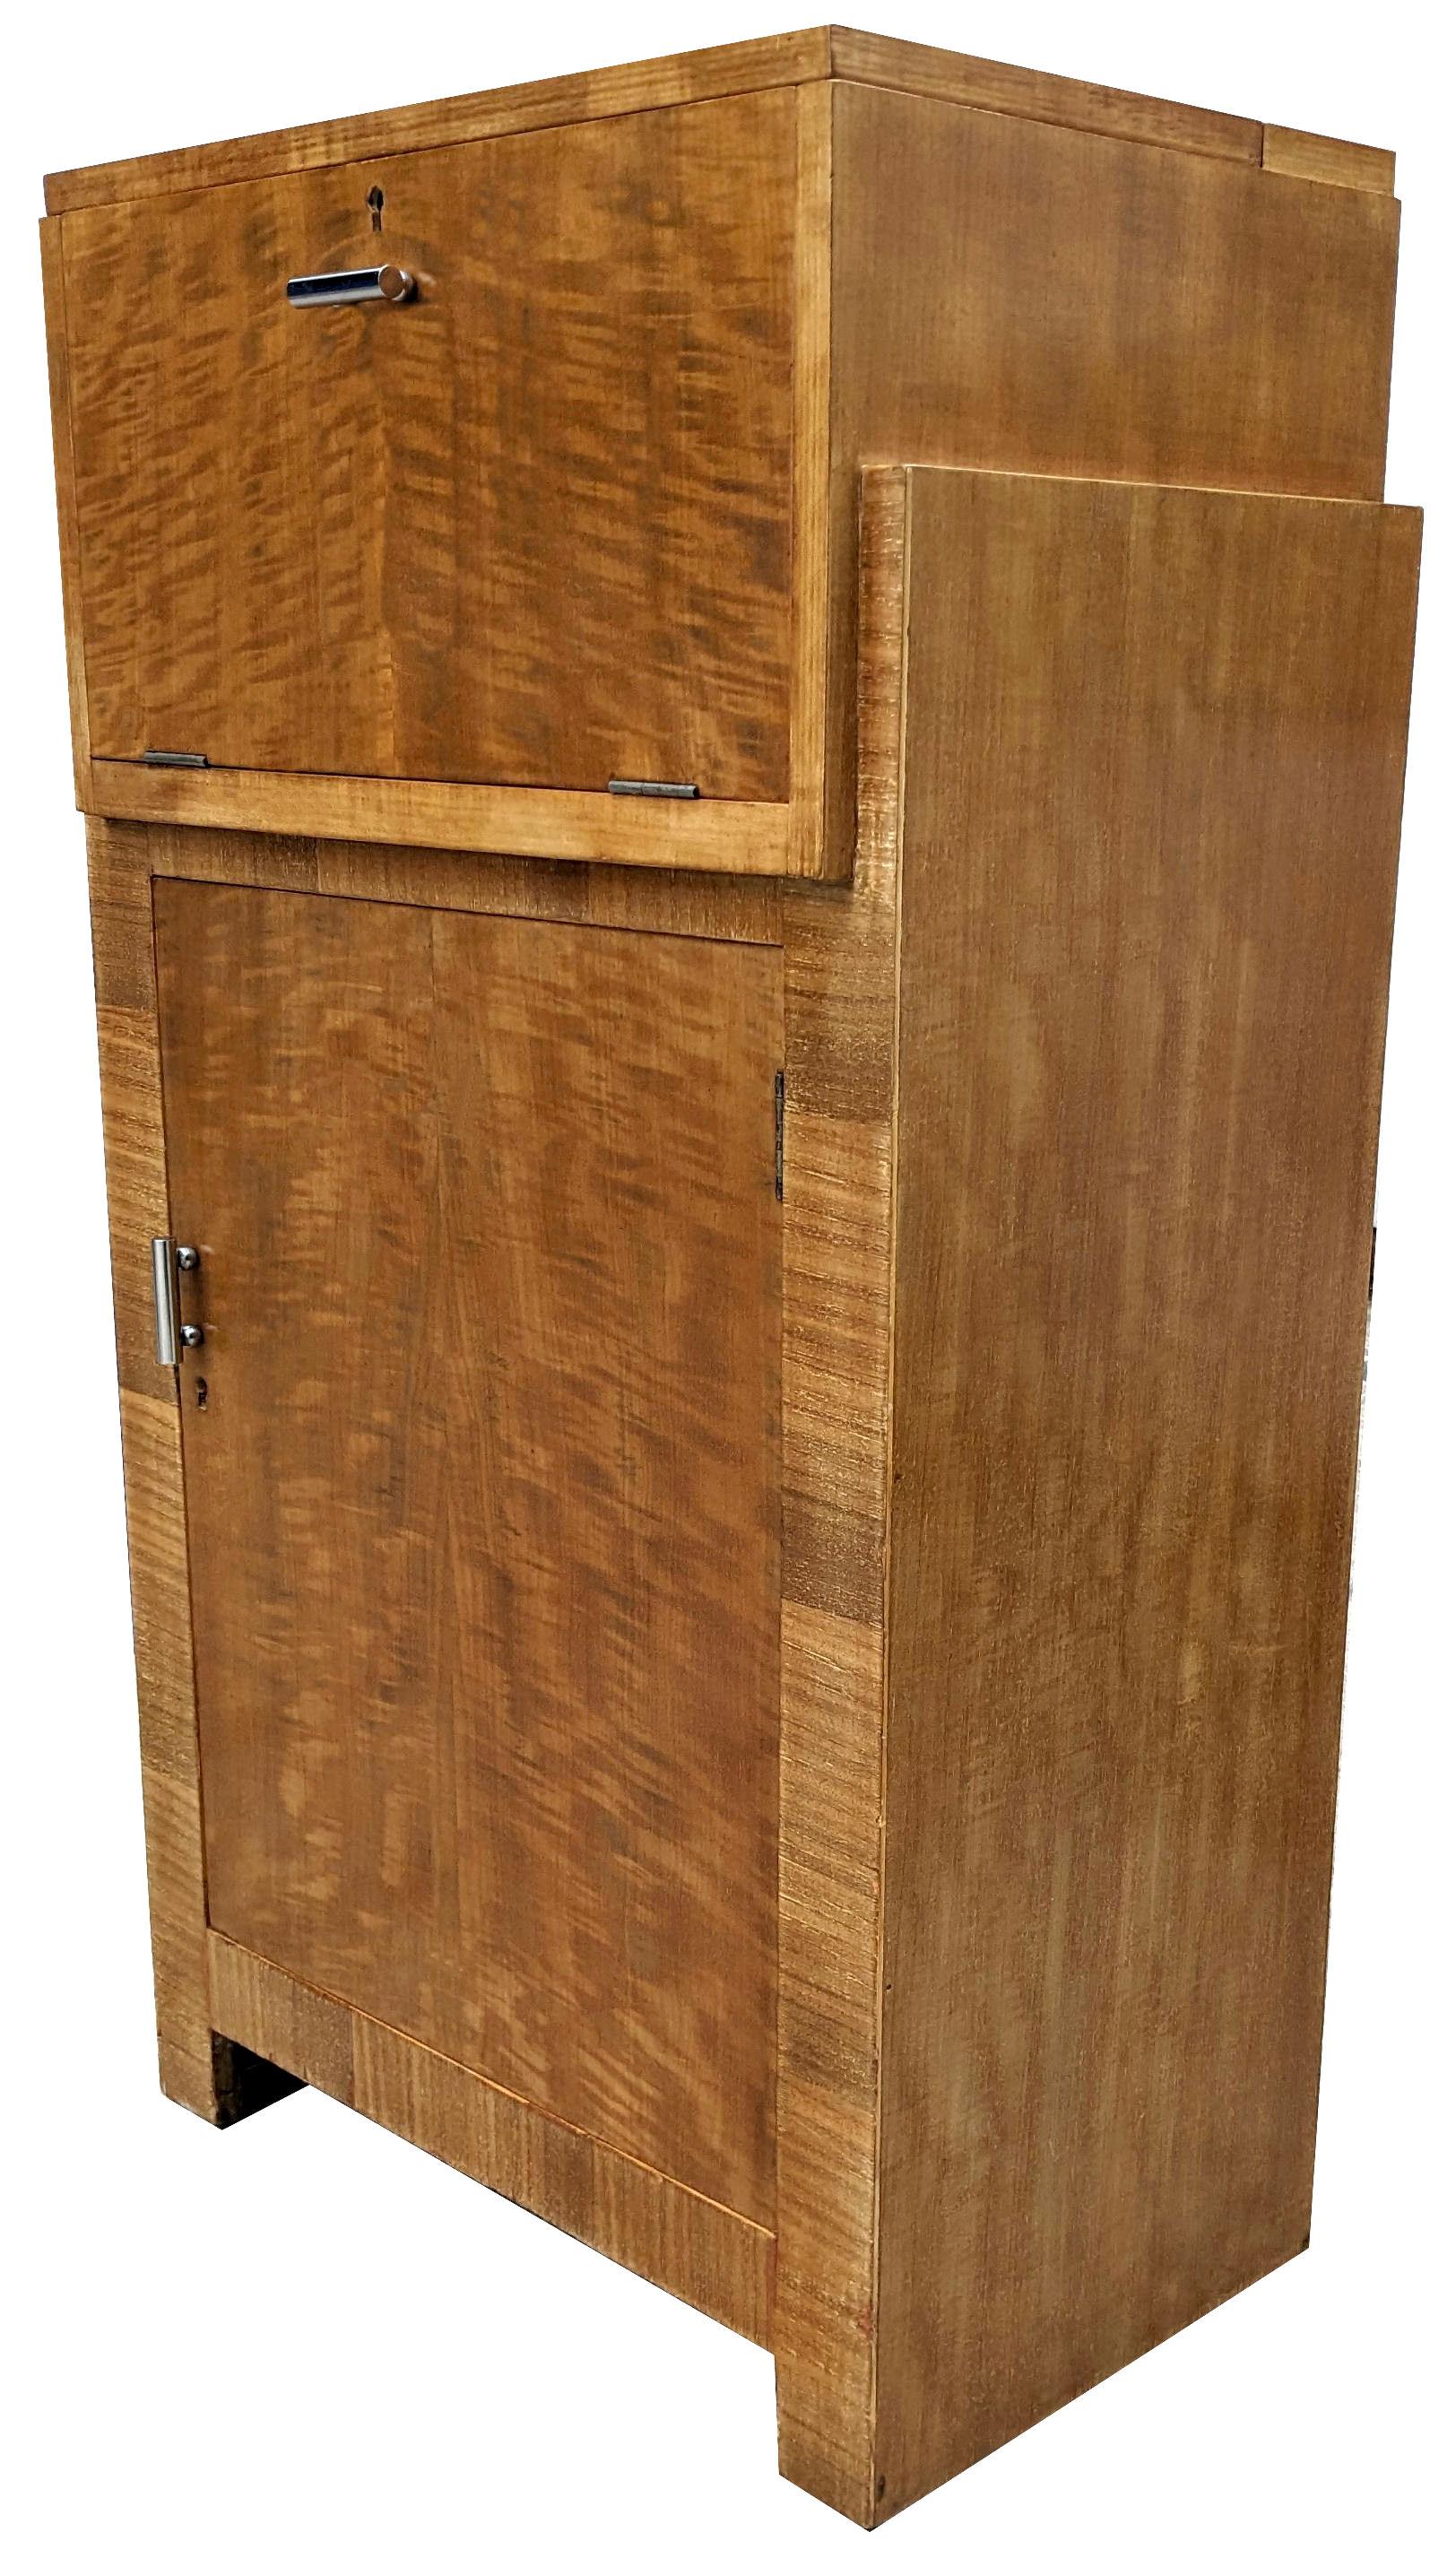 20th Century Art Deco Satinwood Cocktail Cabinet, Dry Bar By Waring & Gillow, England, c1930 For Sale